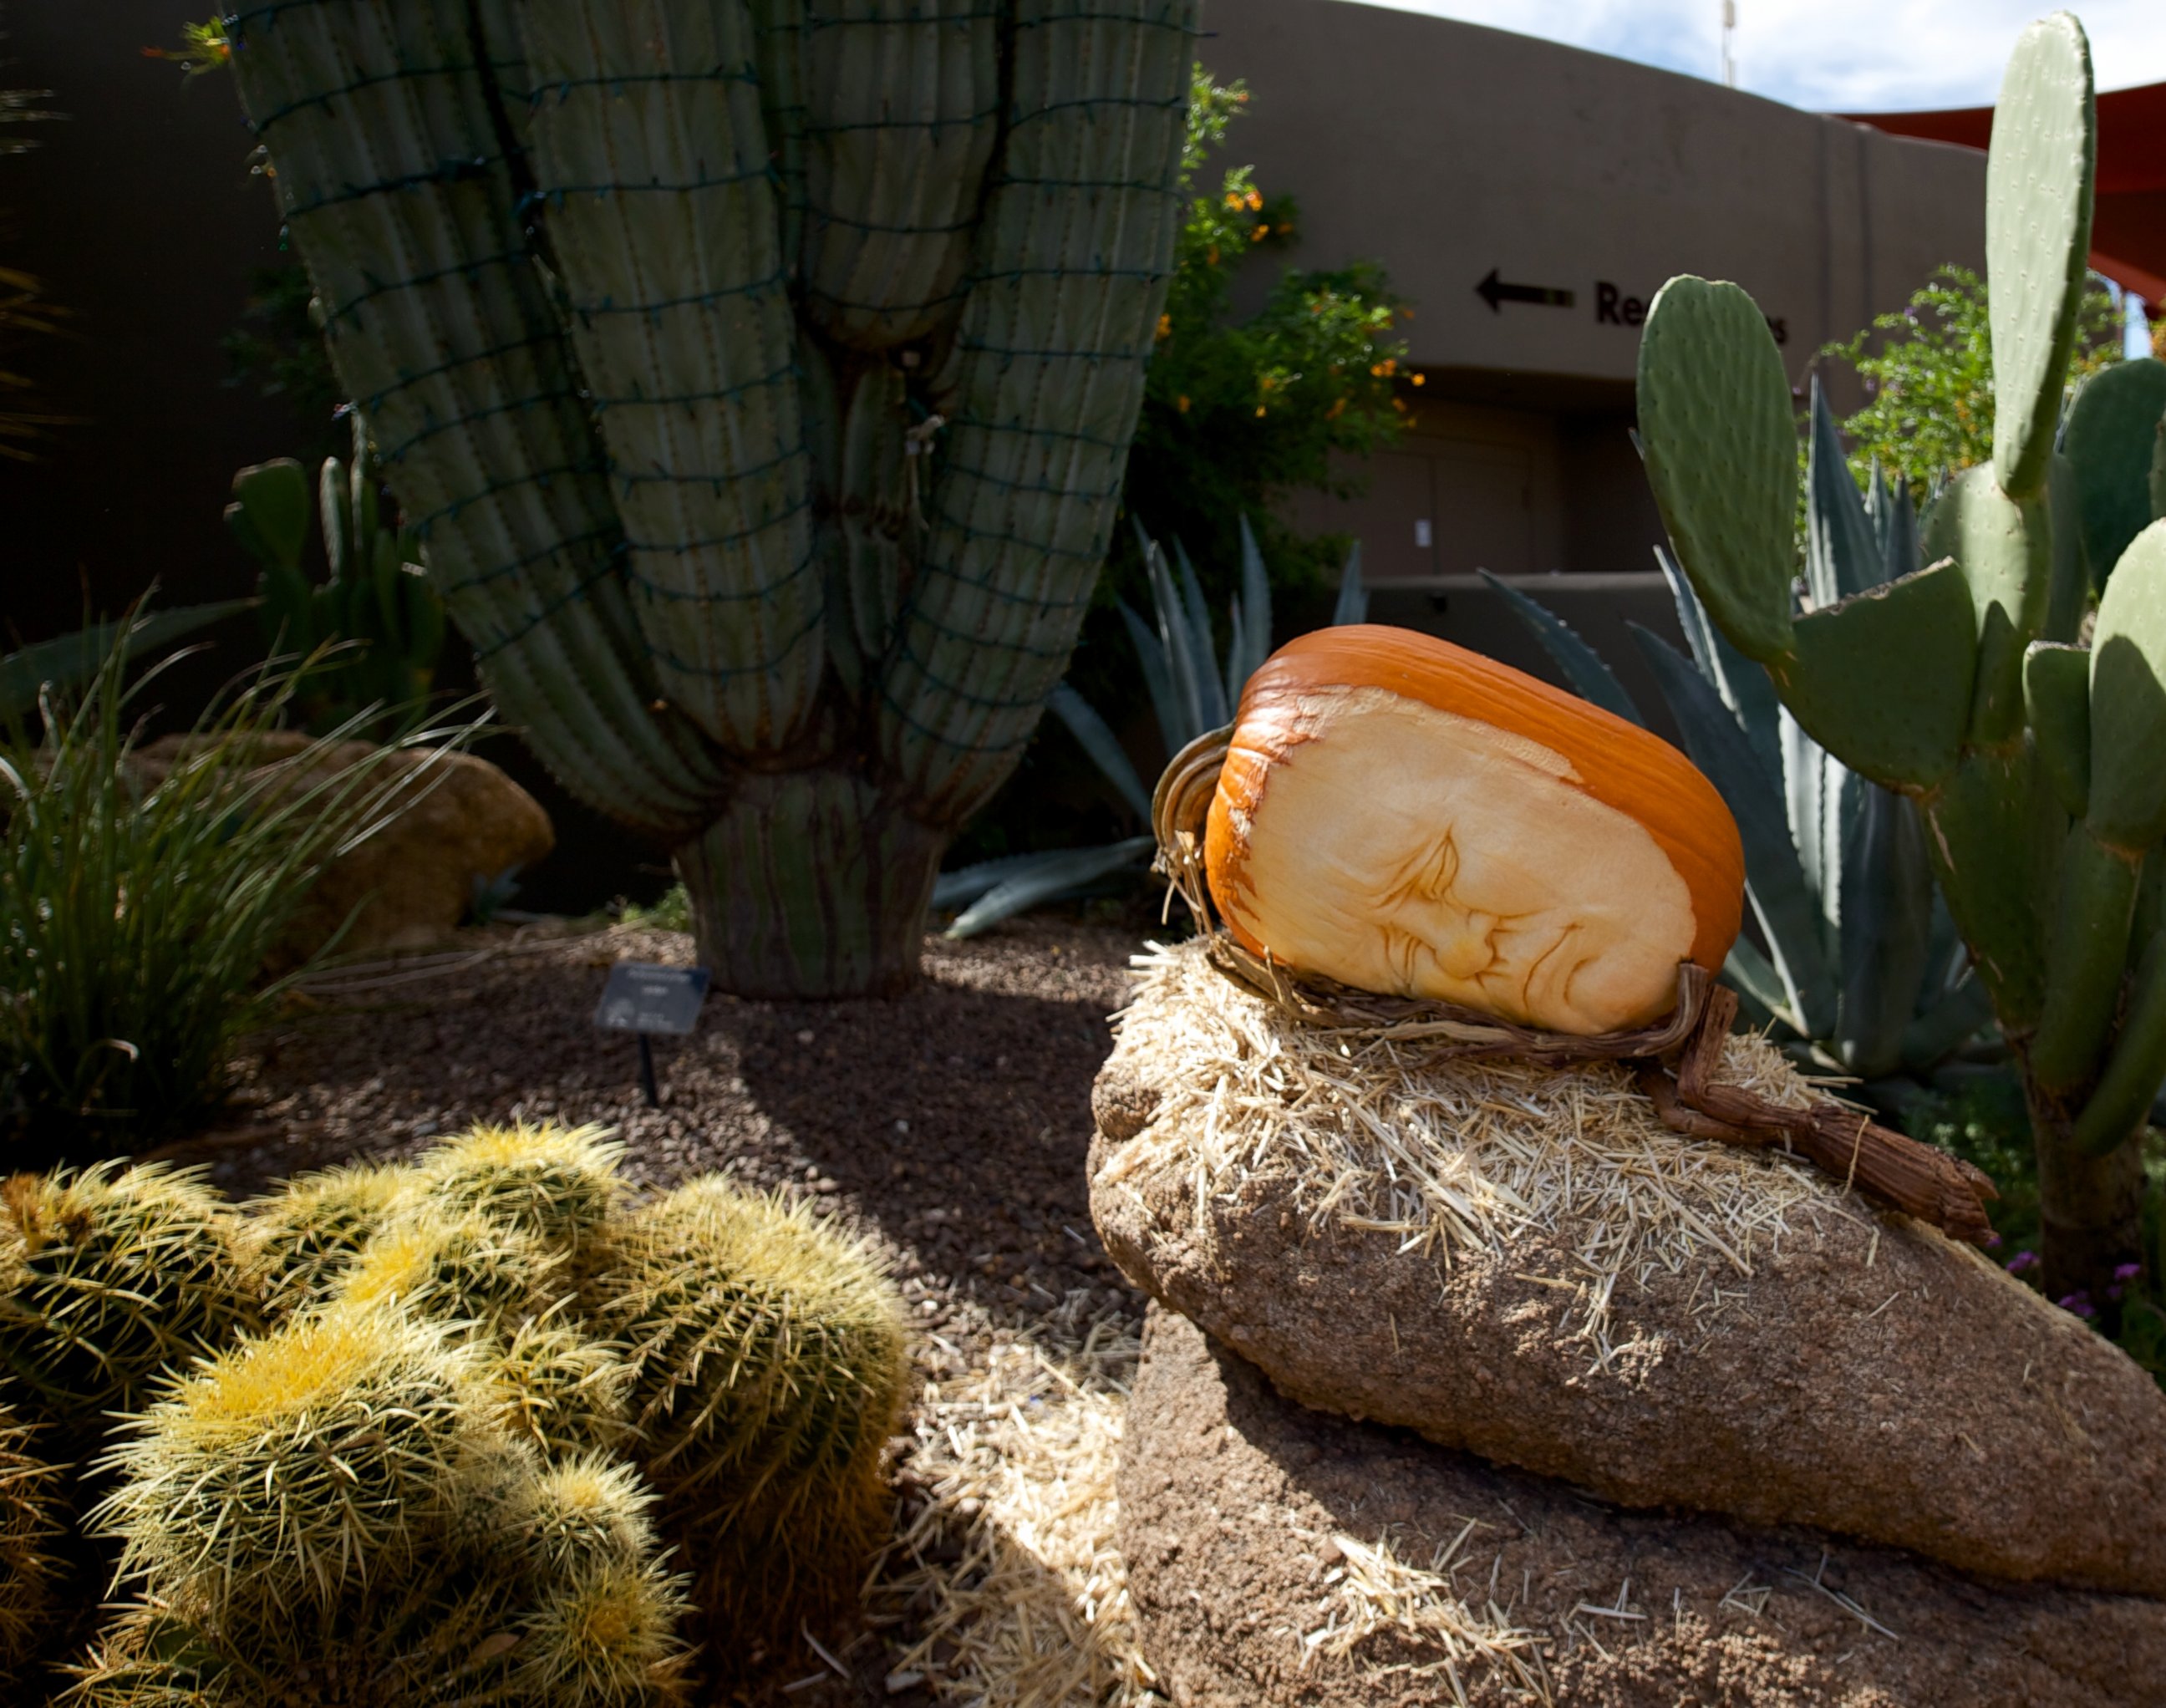 PHOTO: Master sculptor Ray Villafane and his team of carvers created "Enchanted Pumpkin Garden" in Carefree, Arizona. 